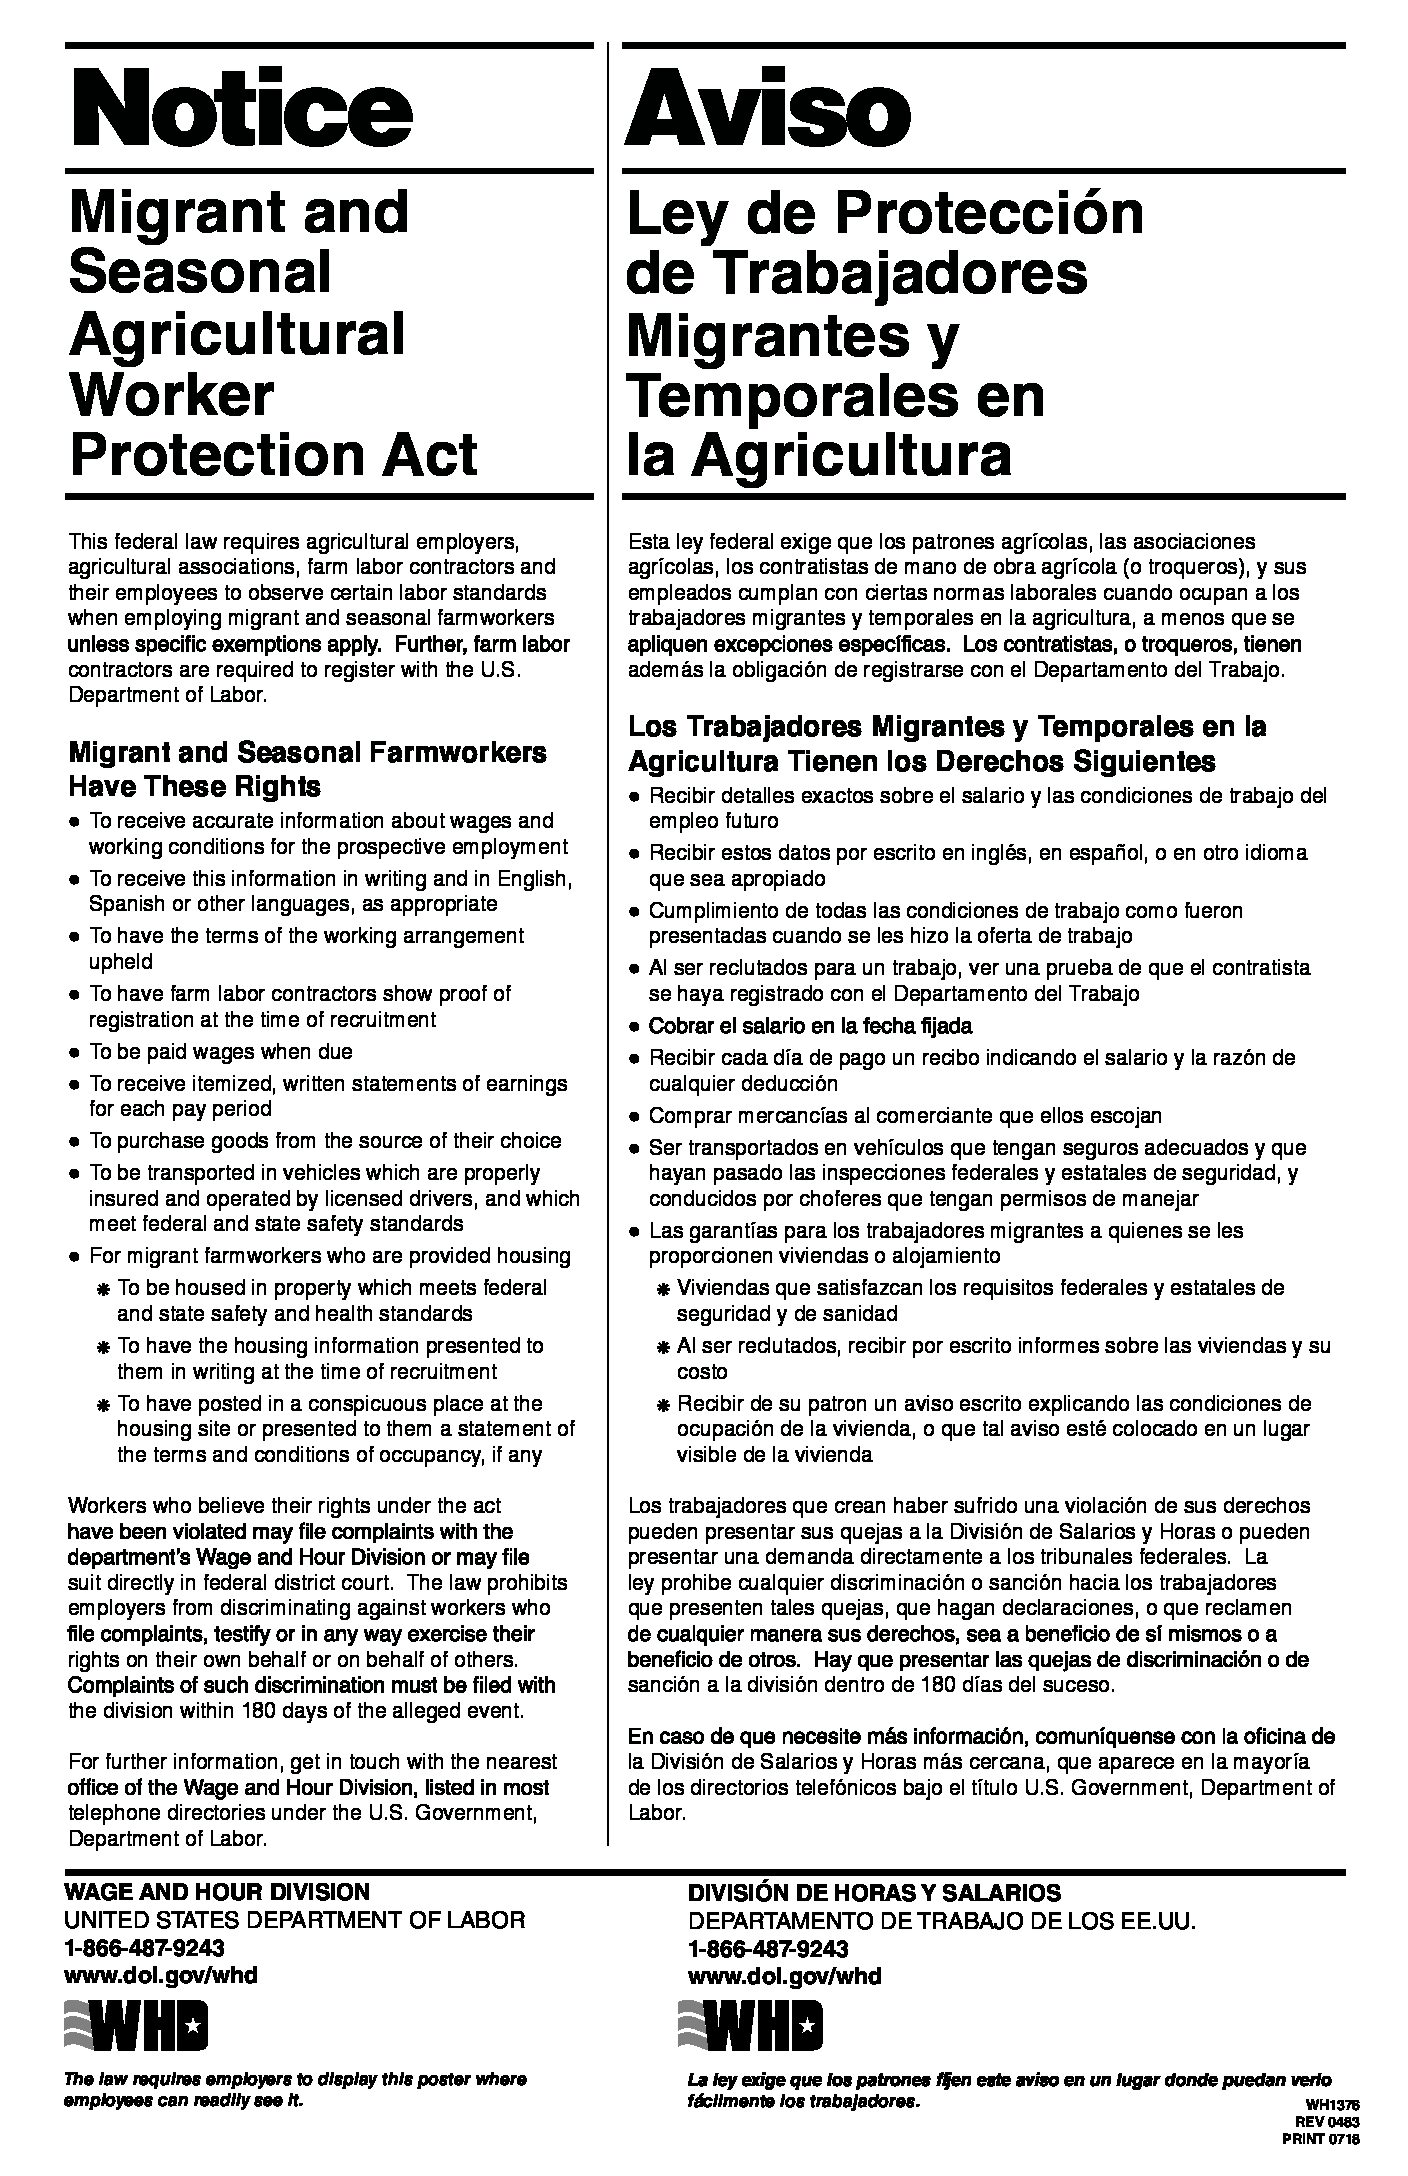 Migrant and Seasonal Agricultural Worker Protection Act (Agricultural subject to.  MSPA) poster